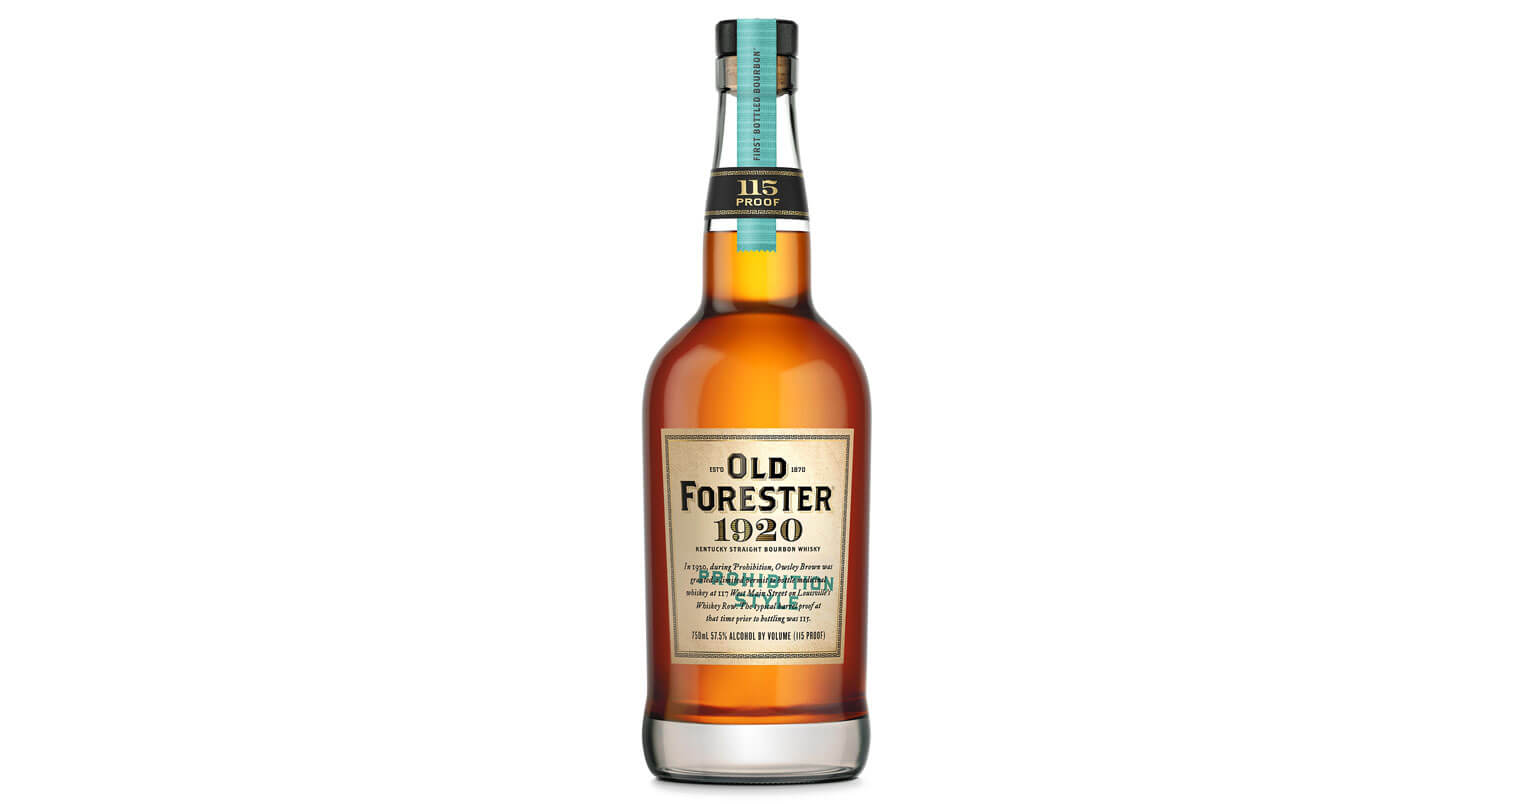 Old Forester Releases 1920 Prohibition Style, featured image